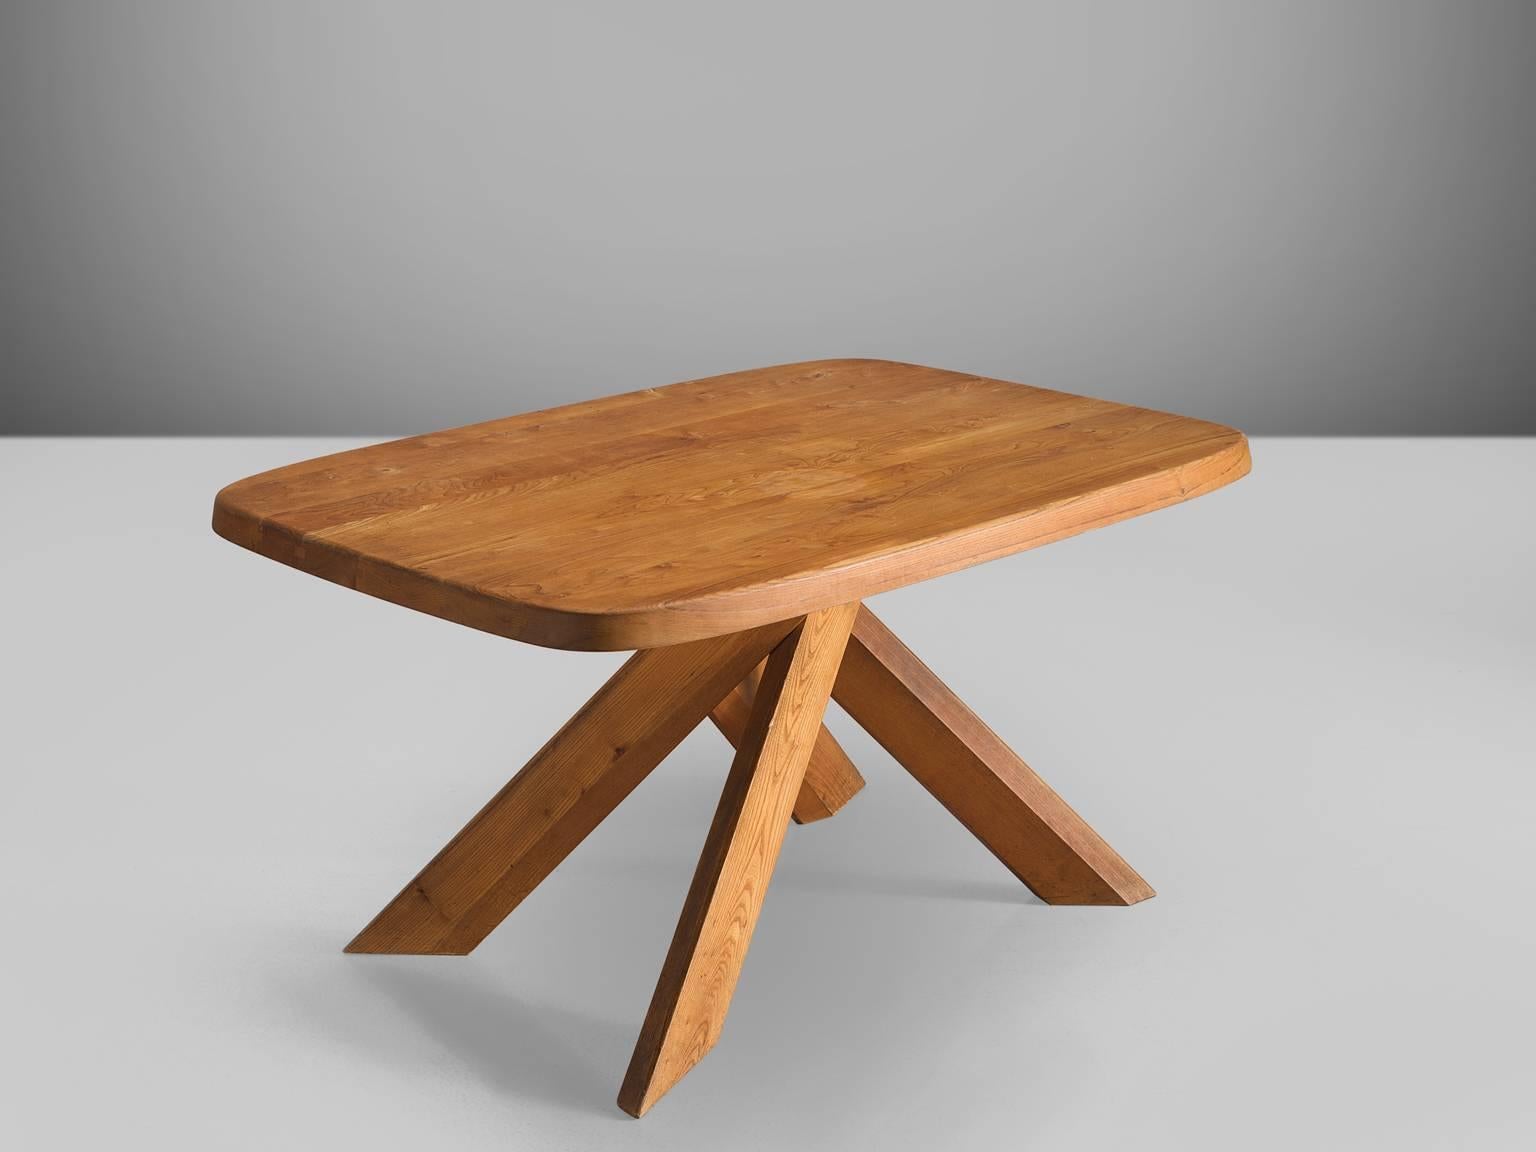 Pierre Chapo, 'Aban' writing table T35B, elm, France, 1960s.

This small kitchen or dining table in solid elm by master woodworker Pierre Chapo is part of the midcentury design collection. The basic design and construction as well as the use of